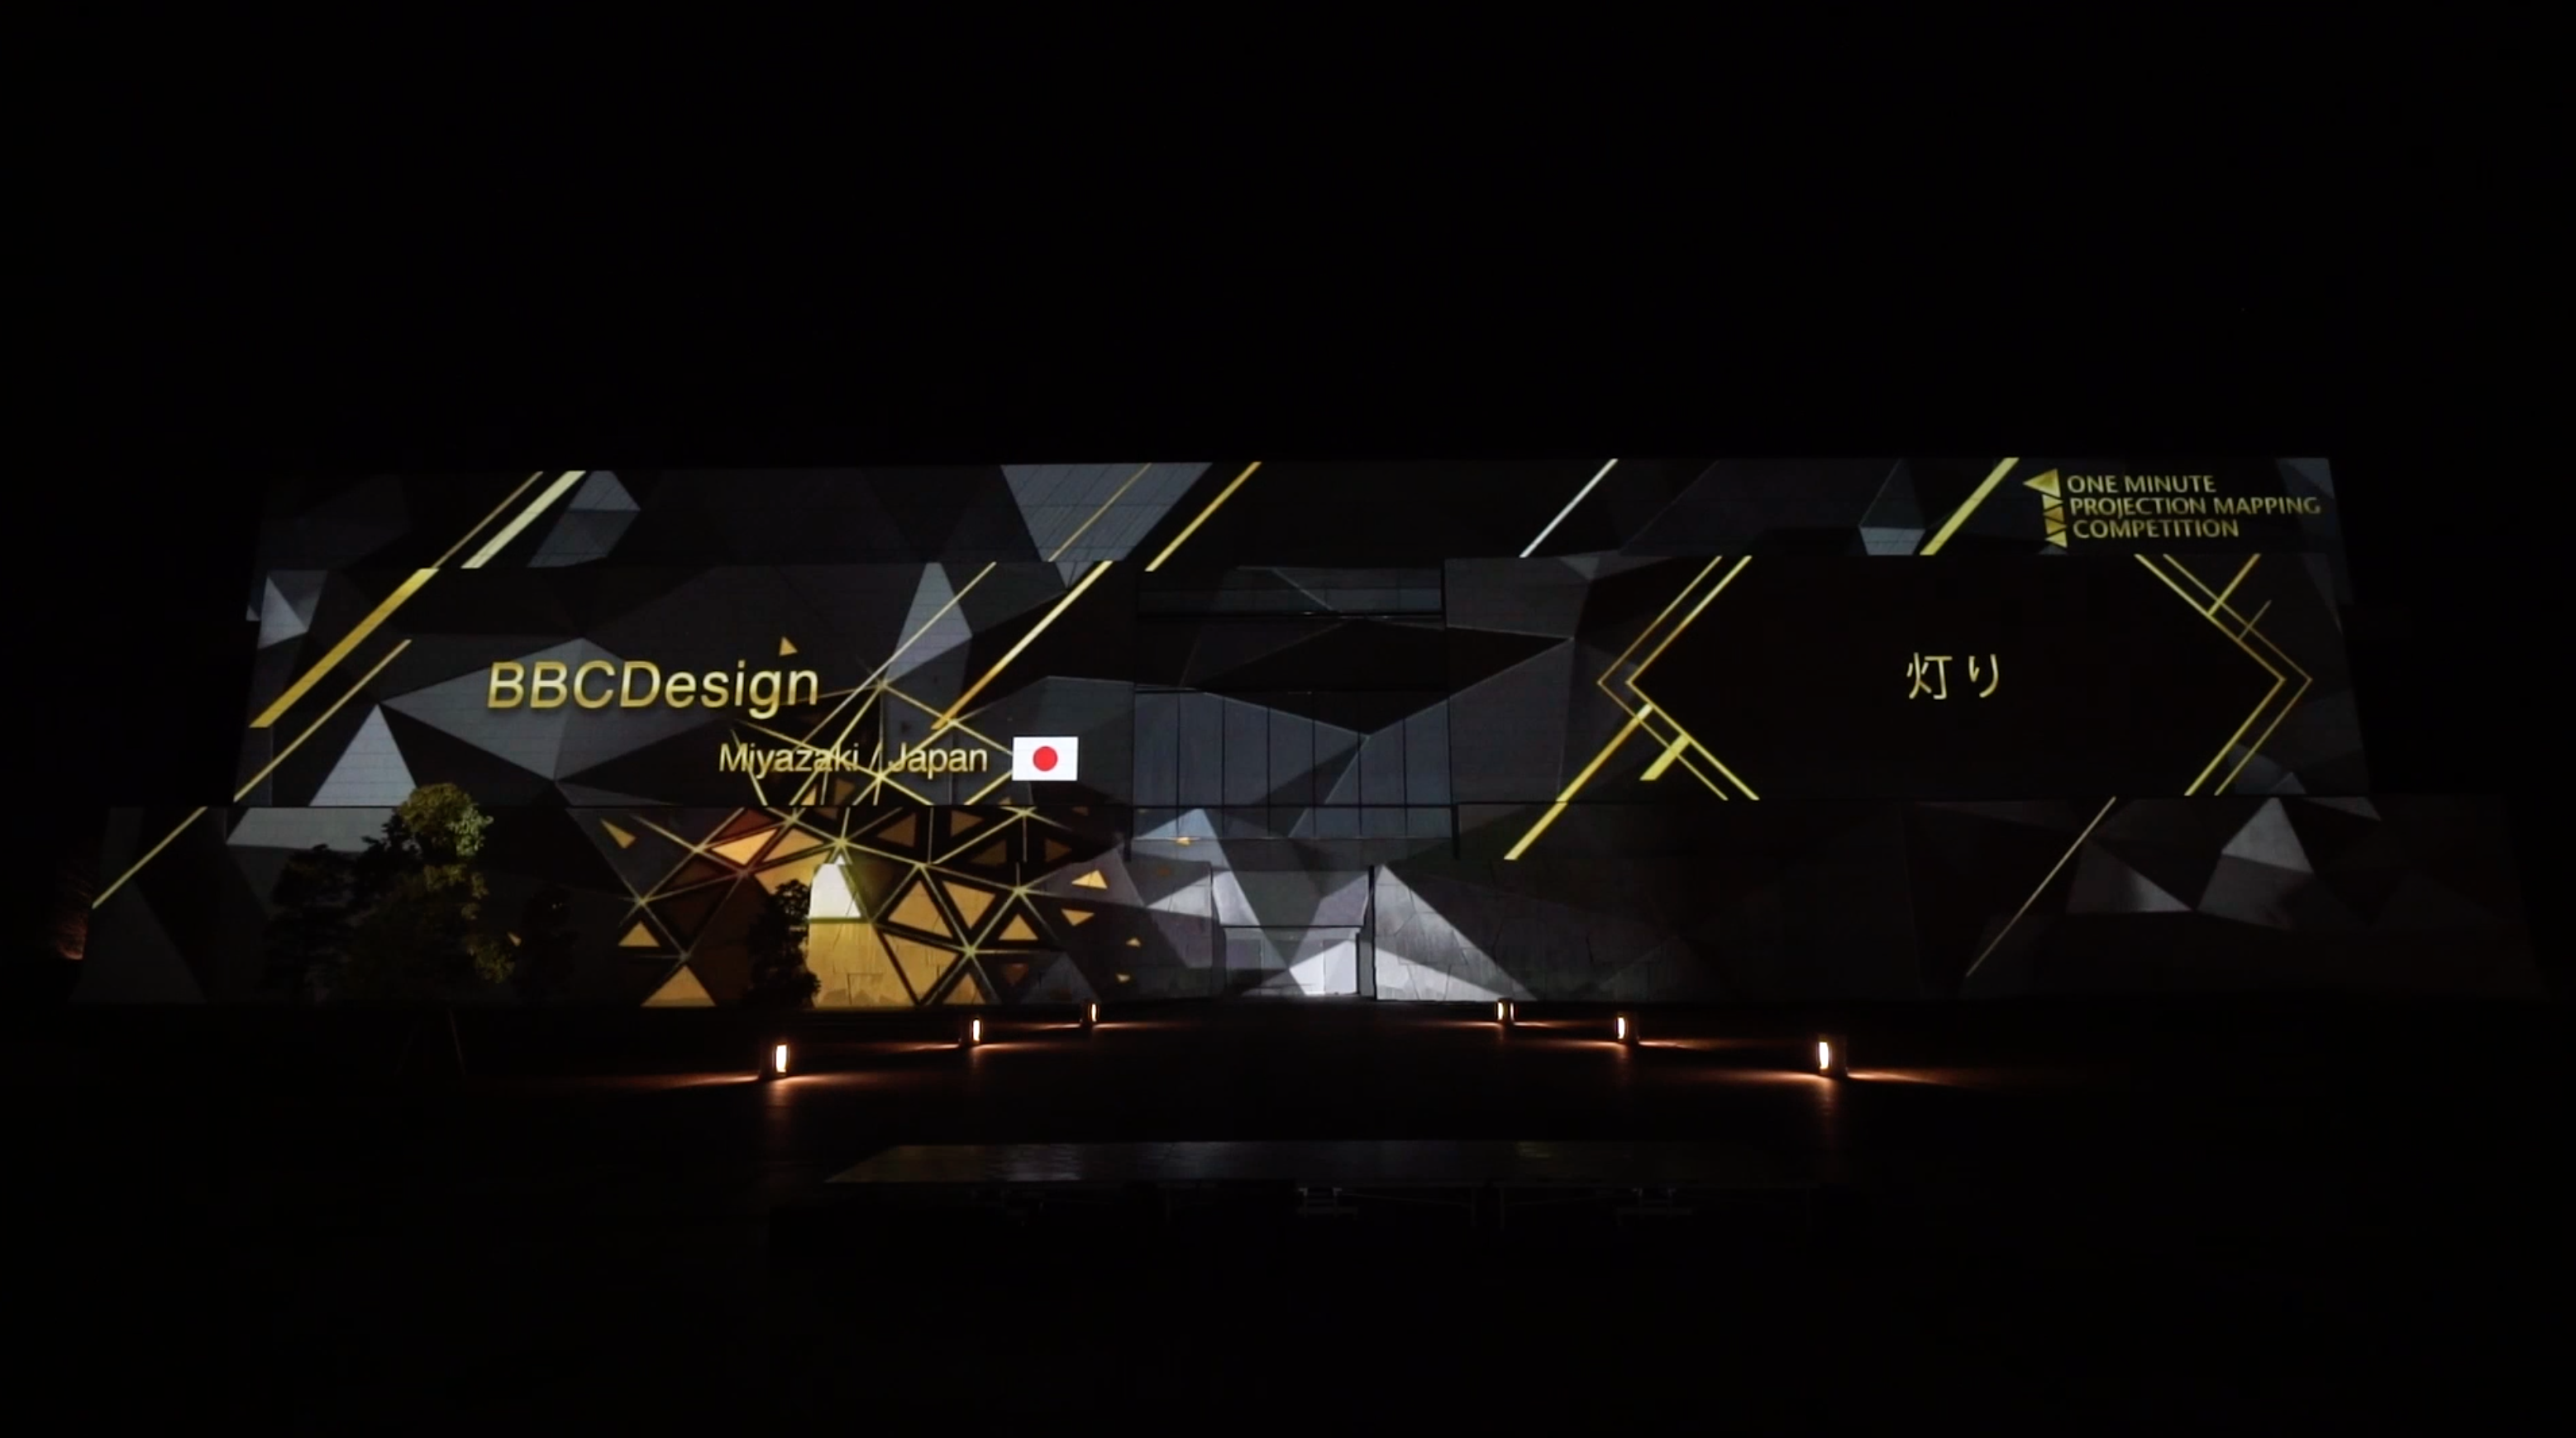 1minute Projection Mapping in MIYZAKIファイナリスト